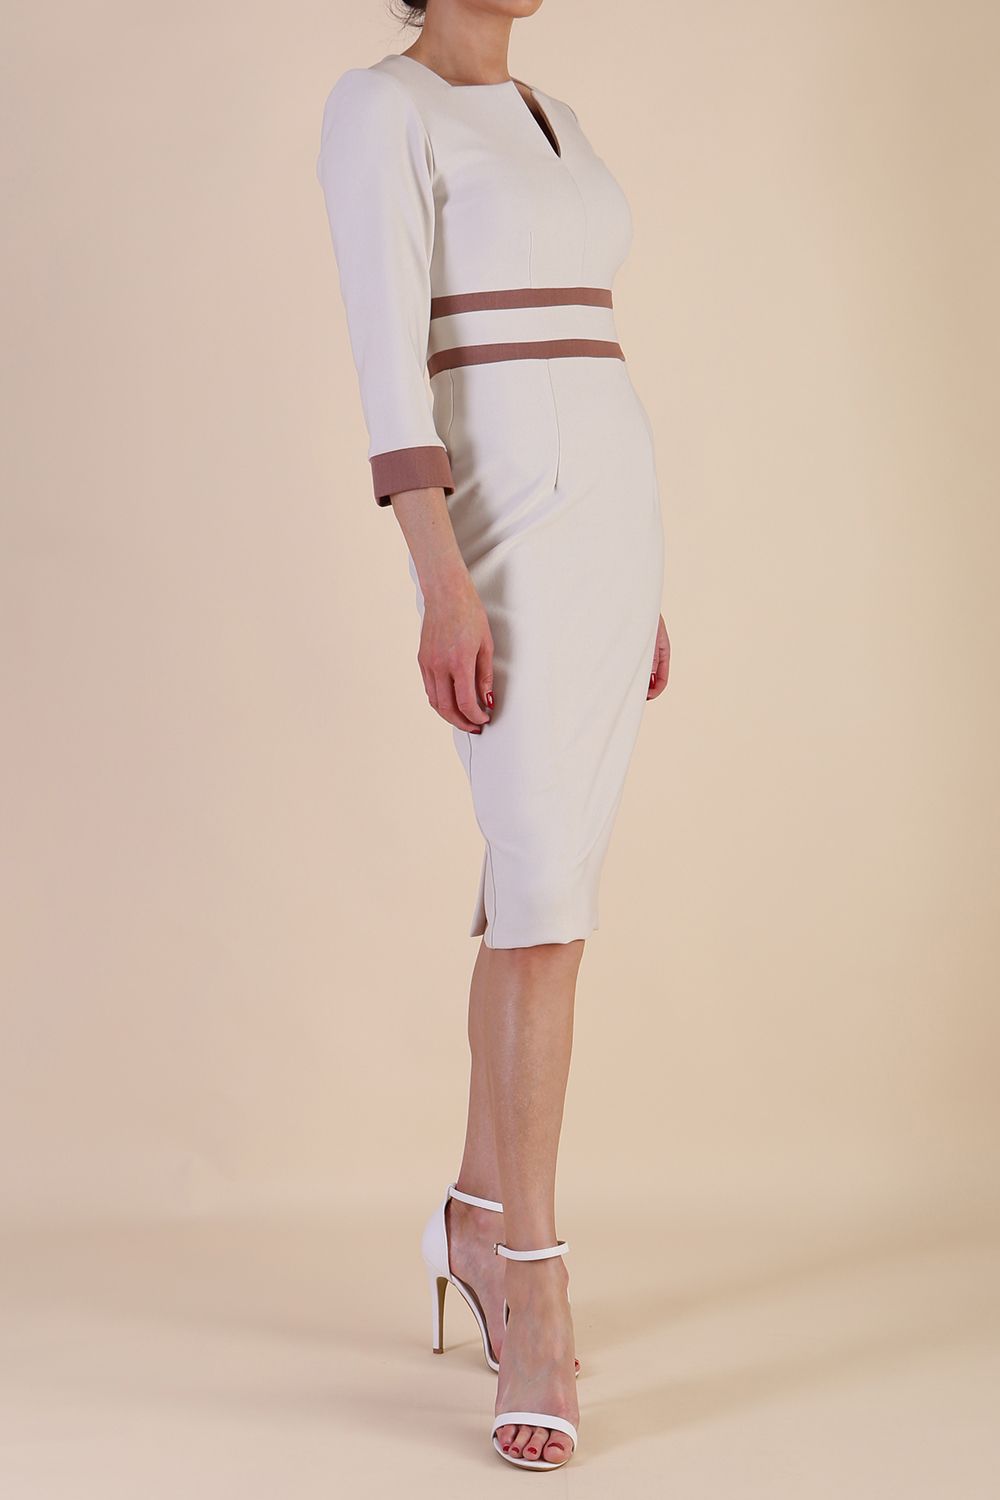 brunette model wearing Diva catwalk Paeonia dress square neckline with a vent in sandshell beige with Acorn Brown and sandshell beige stripes around the waist and three quarter sleeve with Acorn Brown contrast finish front side